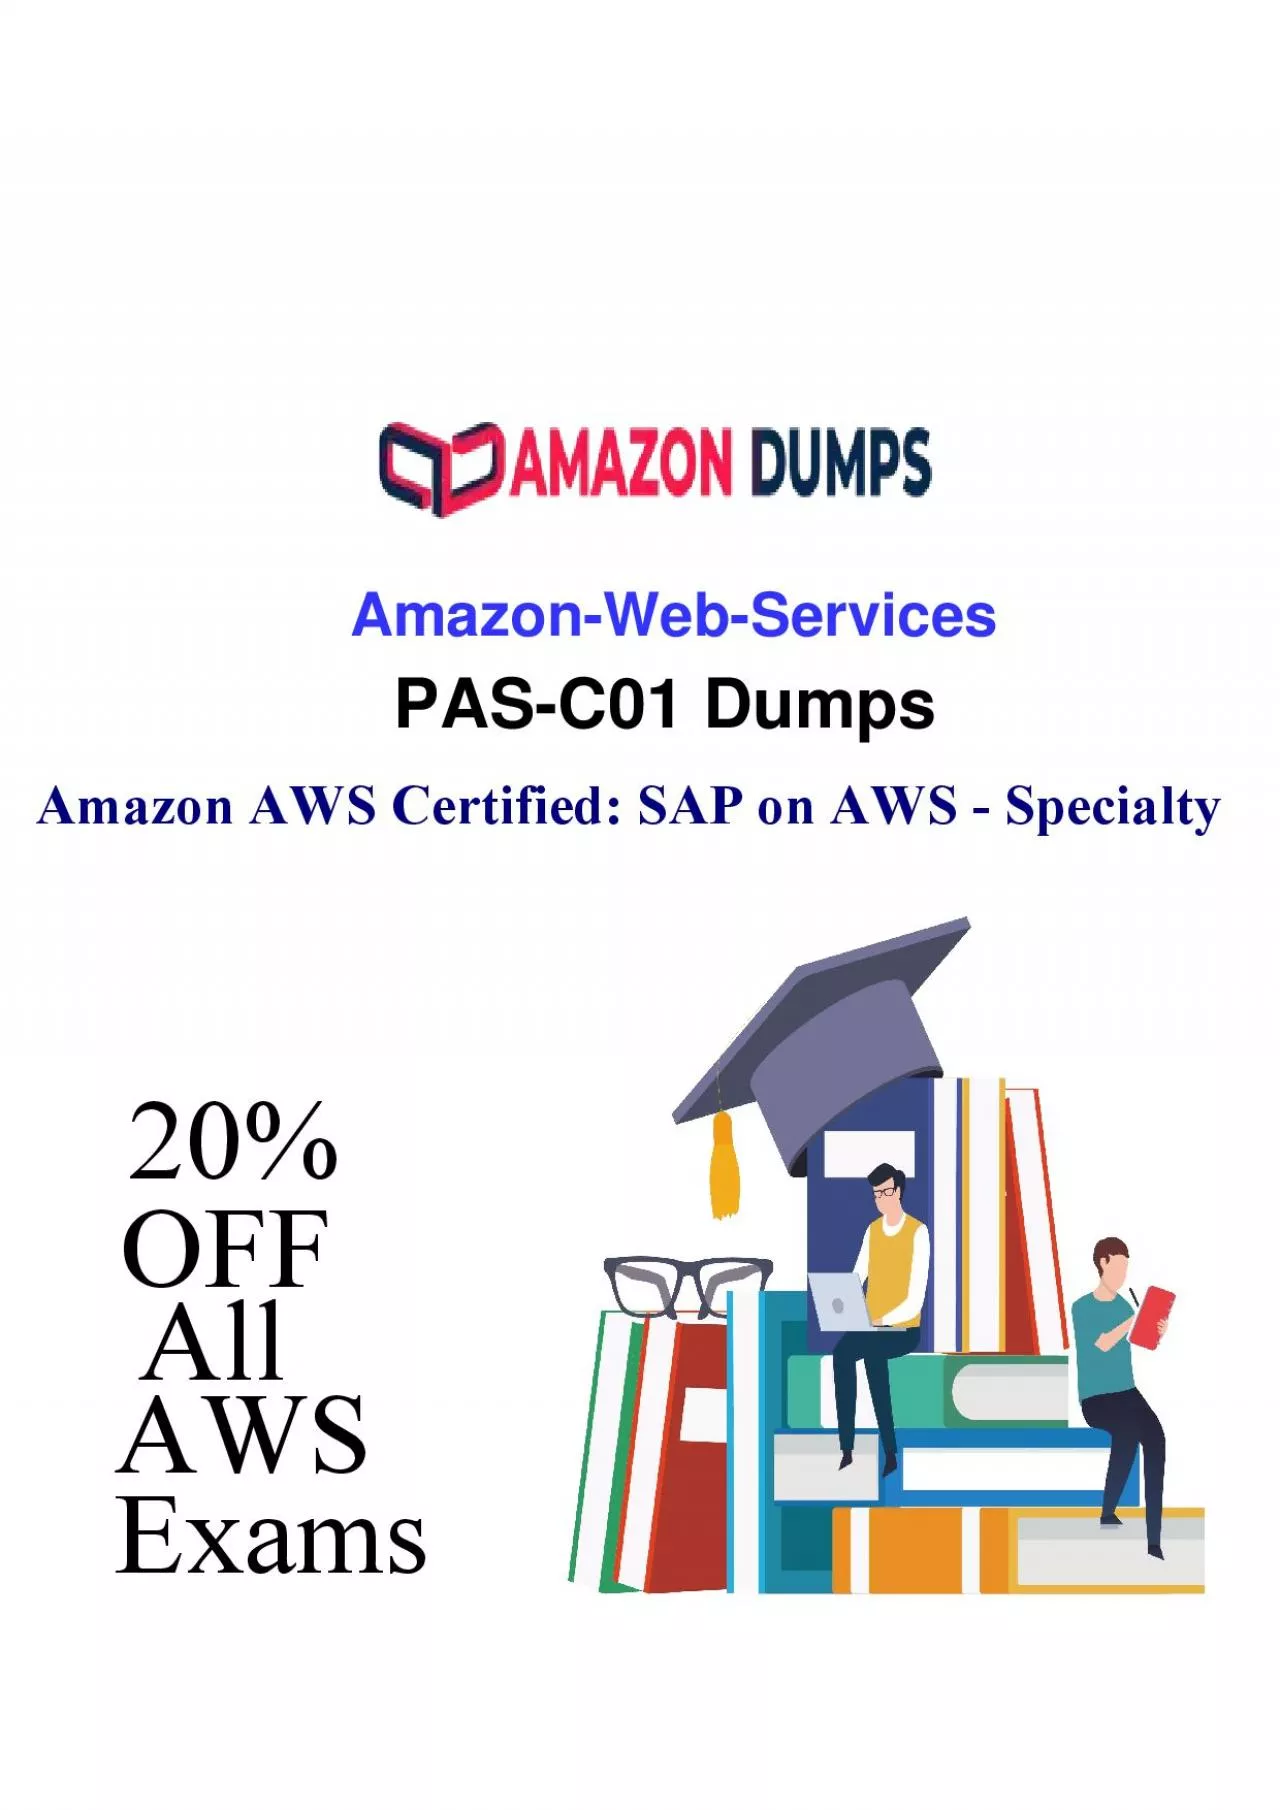 Are You Exam-Ready? Discover the Power of PAS-C01 Dumps